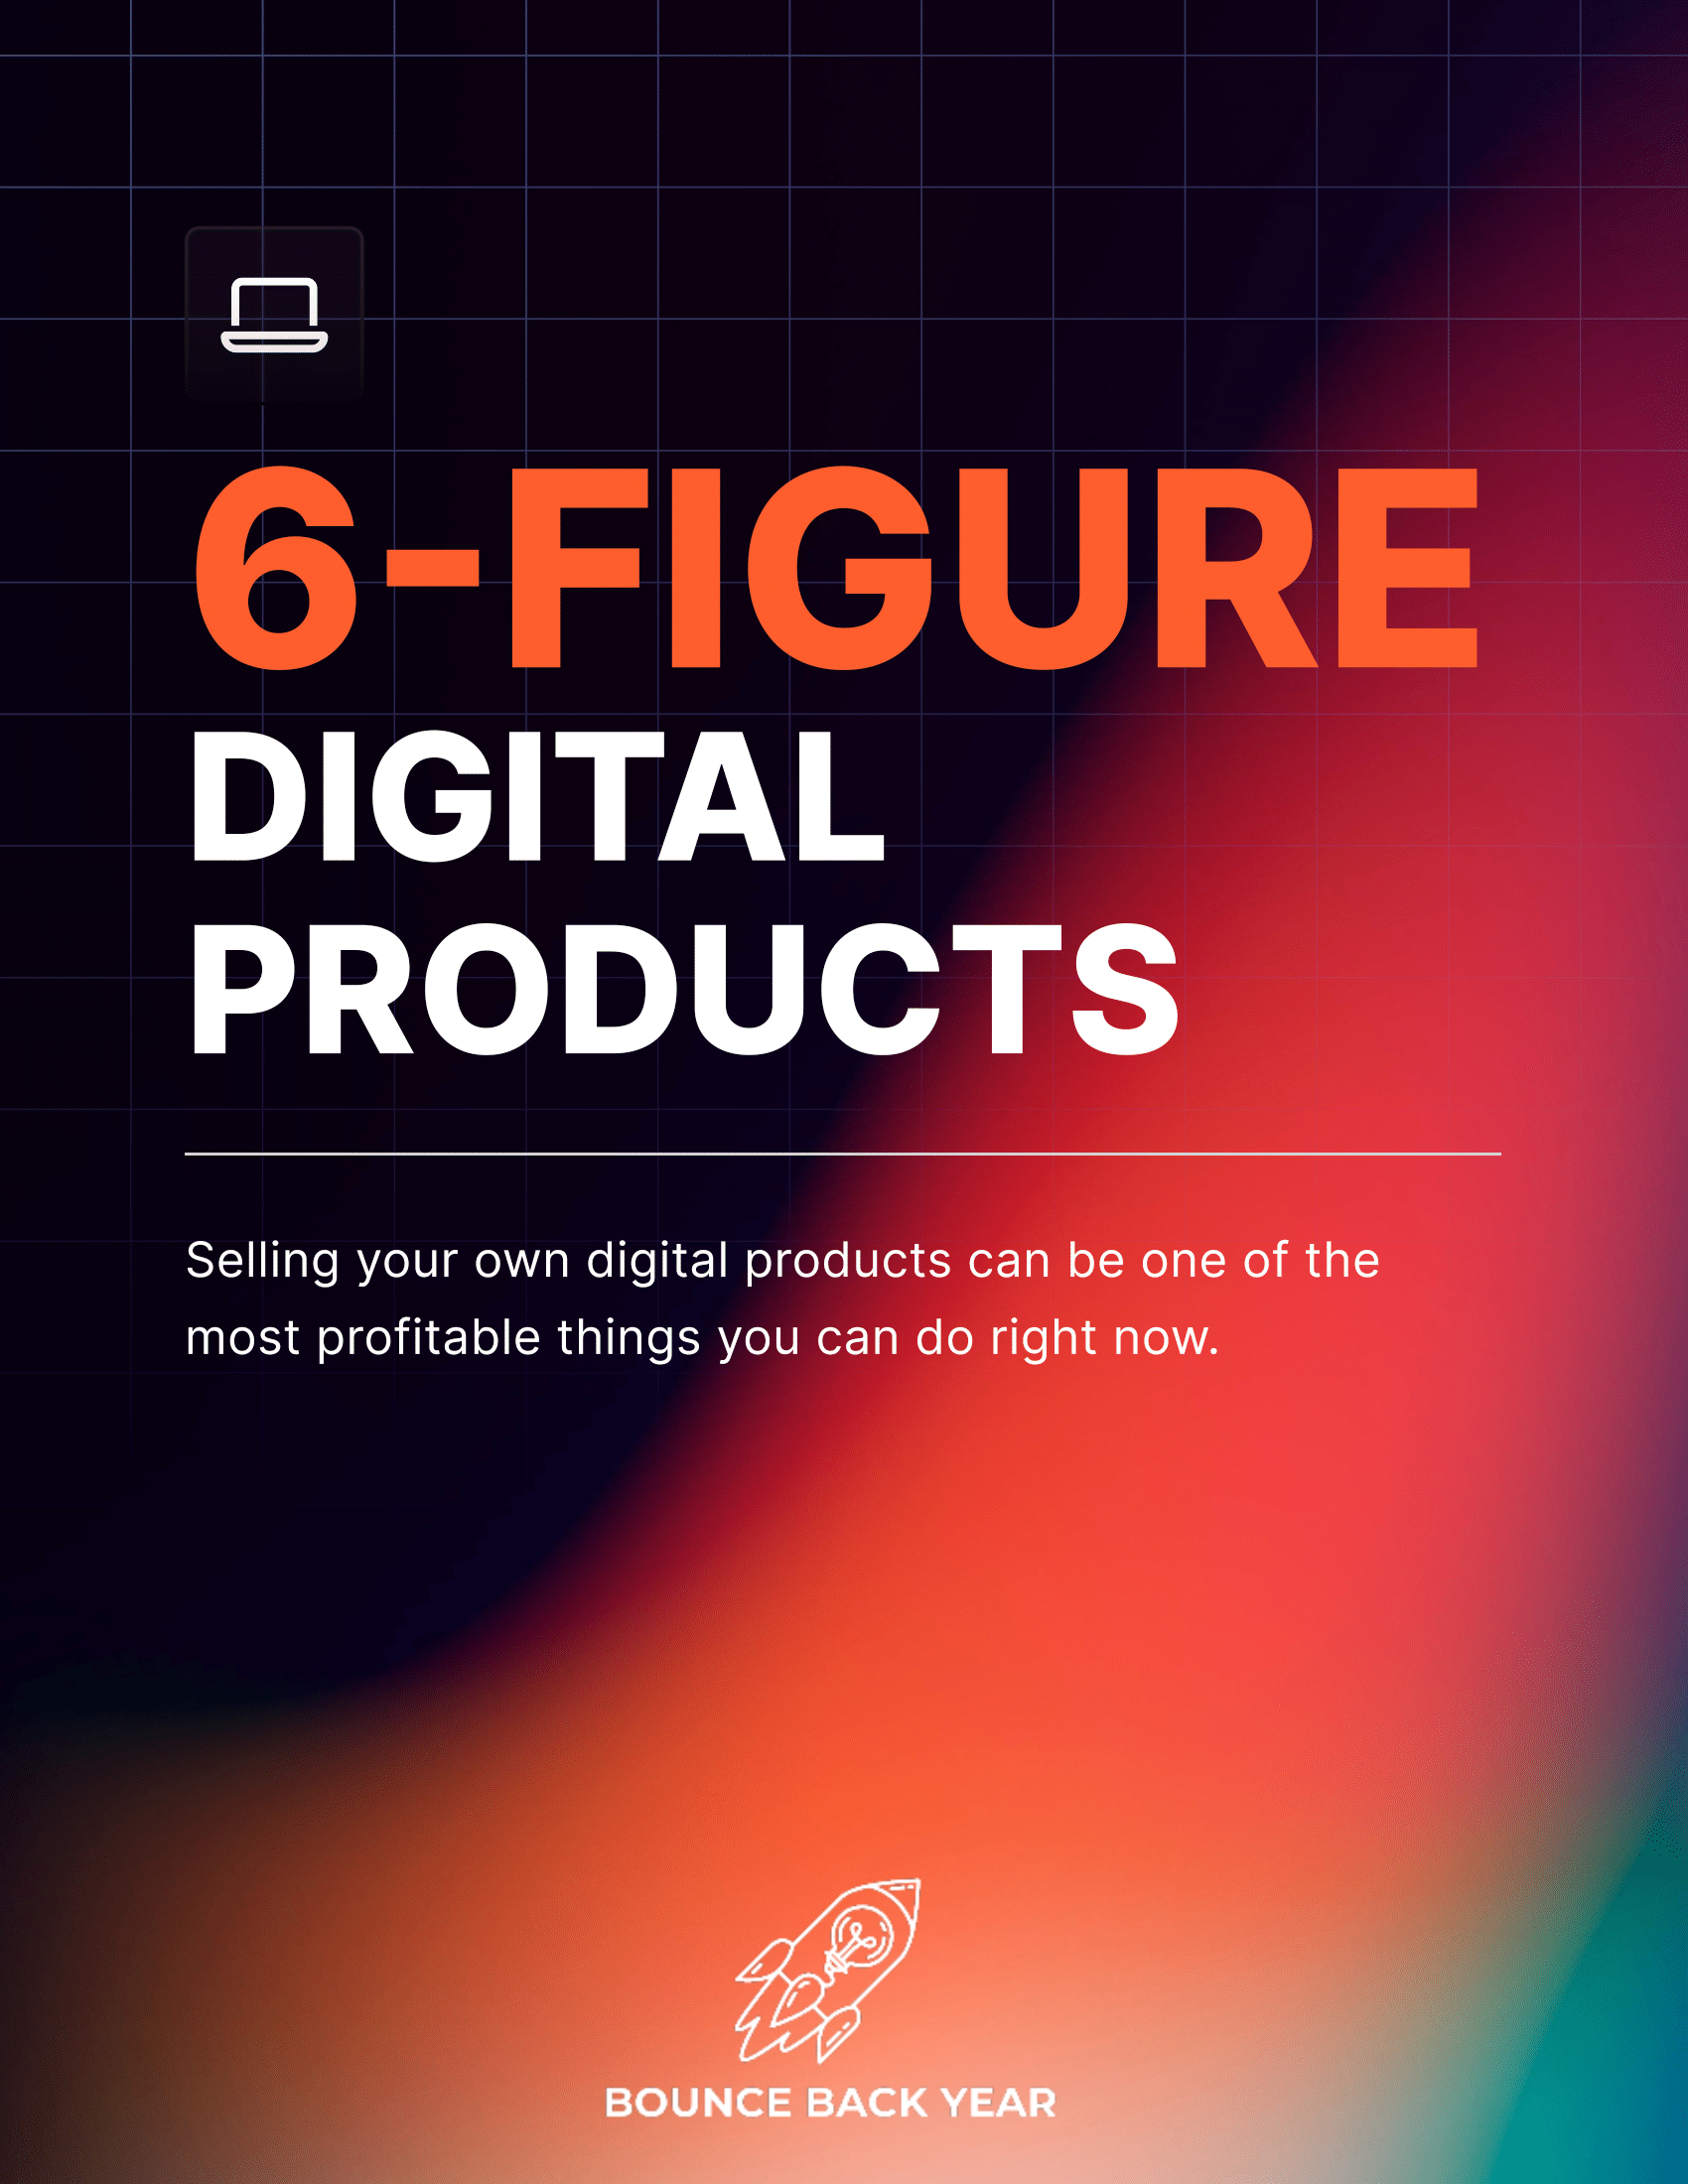 BUNDLE: Access All Of Our DIGITAL PRODUCTS & SAVE $99.50